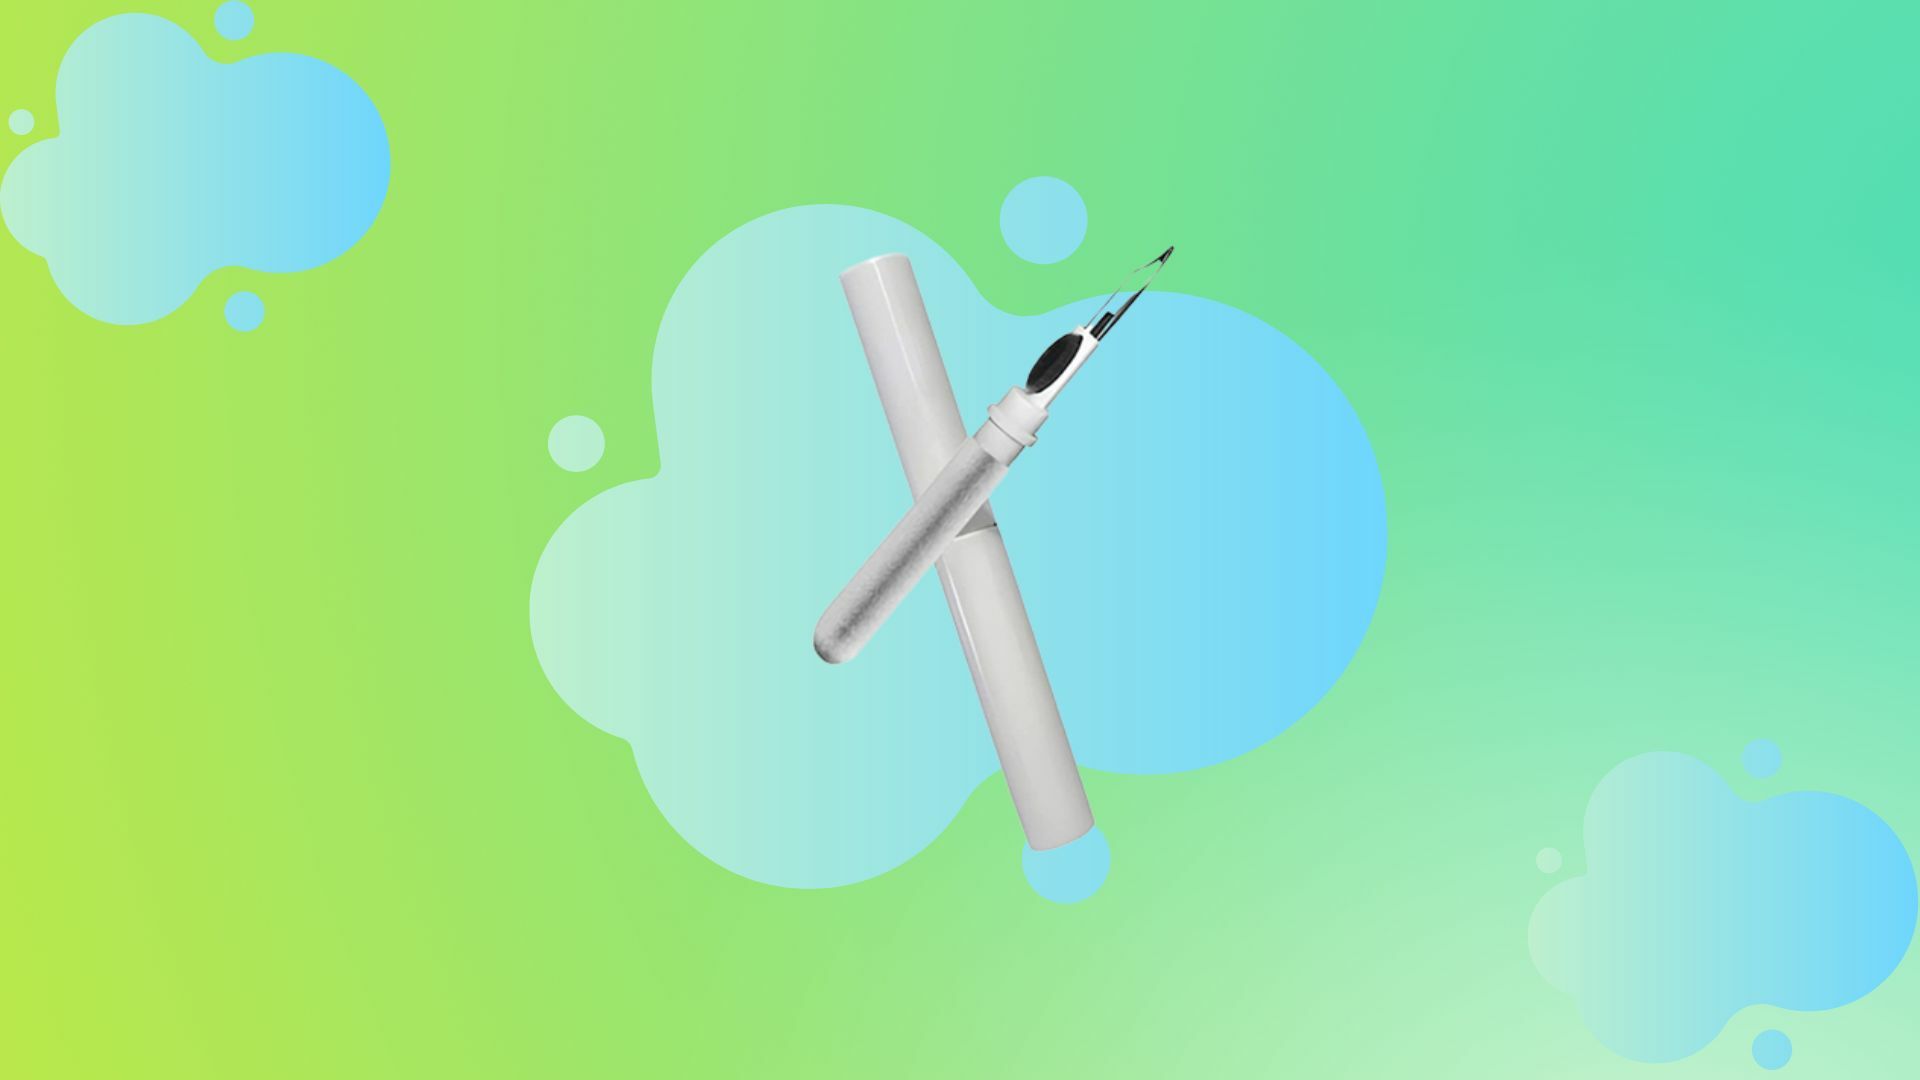 Apple AirPod Deep Cleaner pens on a colorful background.